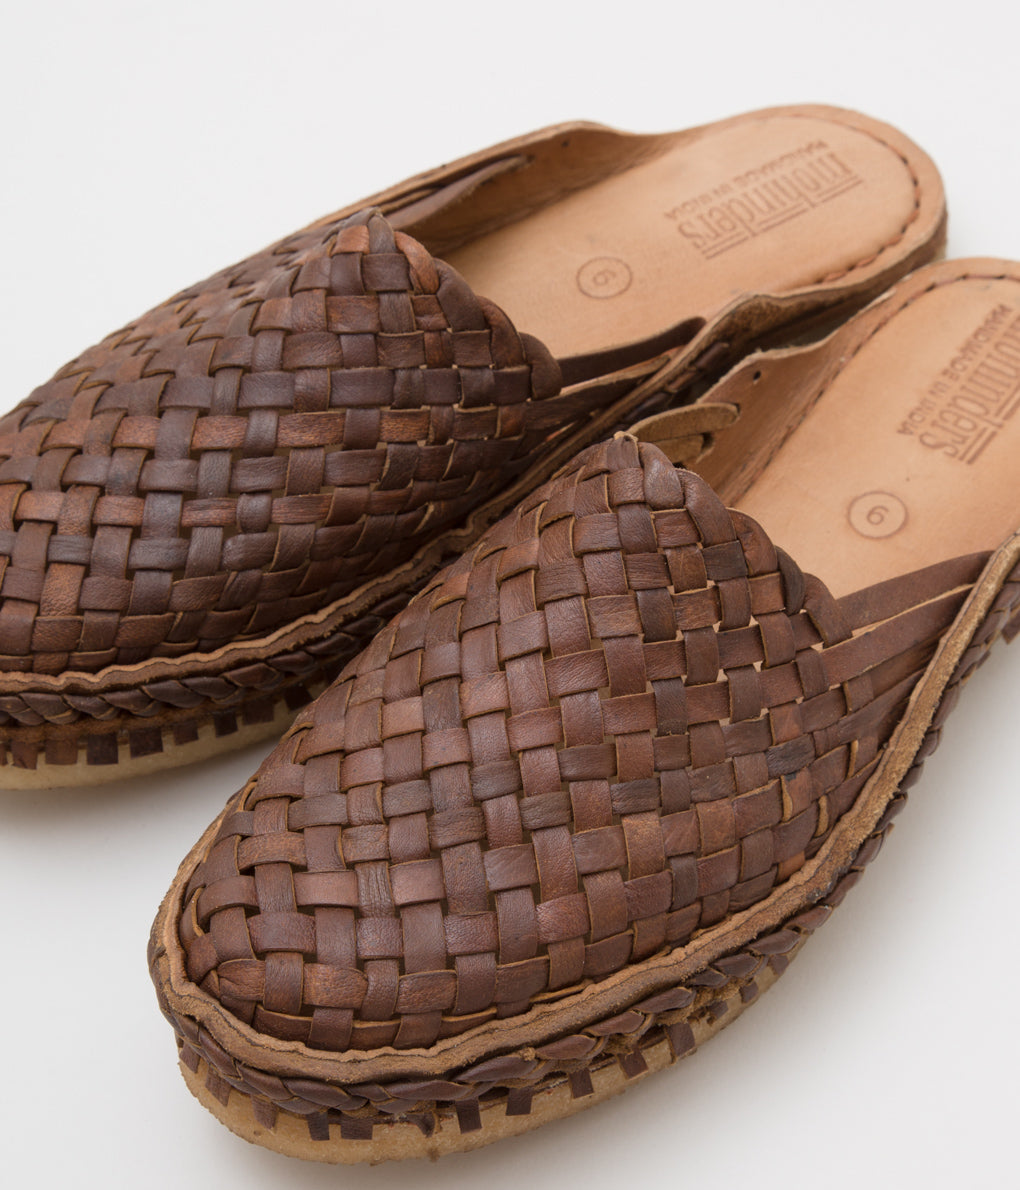 MOHINDERS "WOVEN CITY SLIPPER"(OILED BROWN)